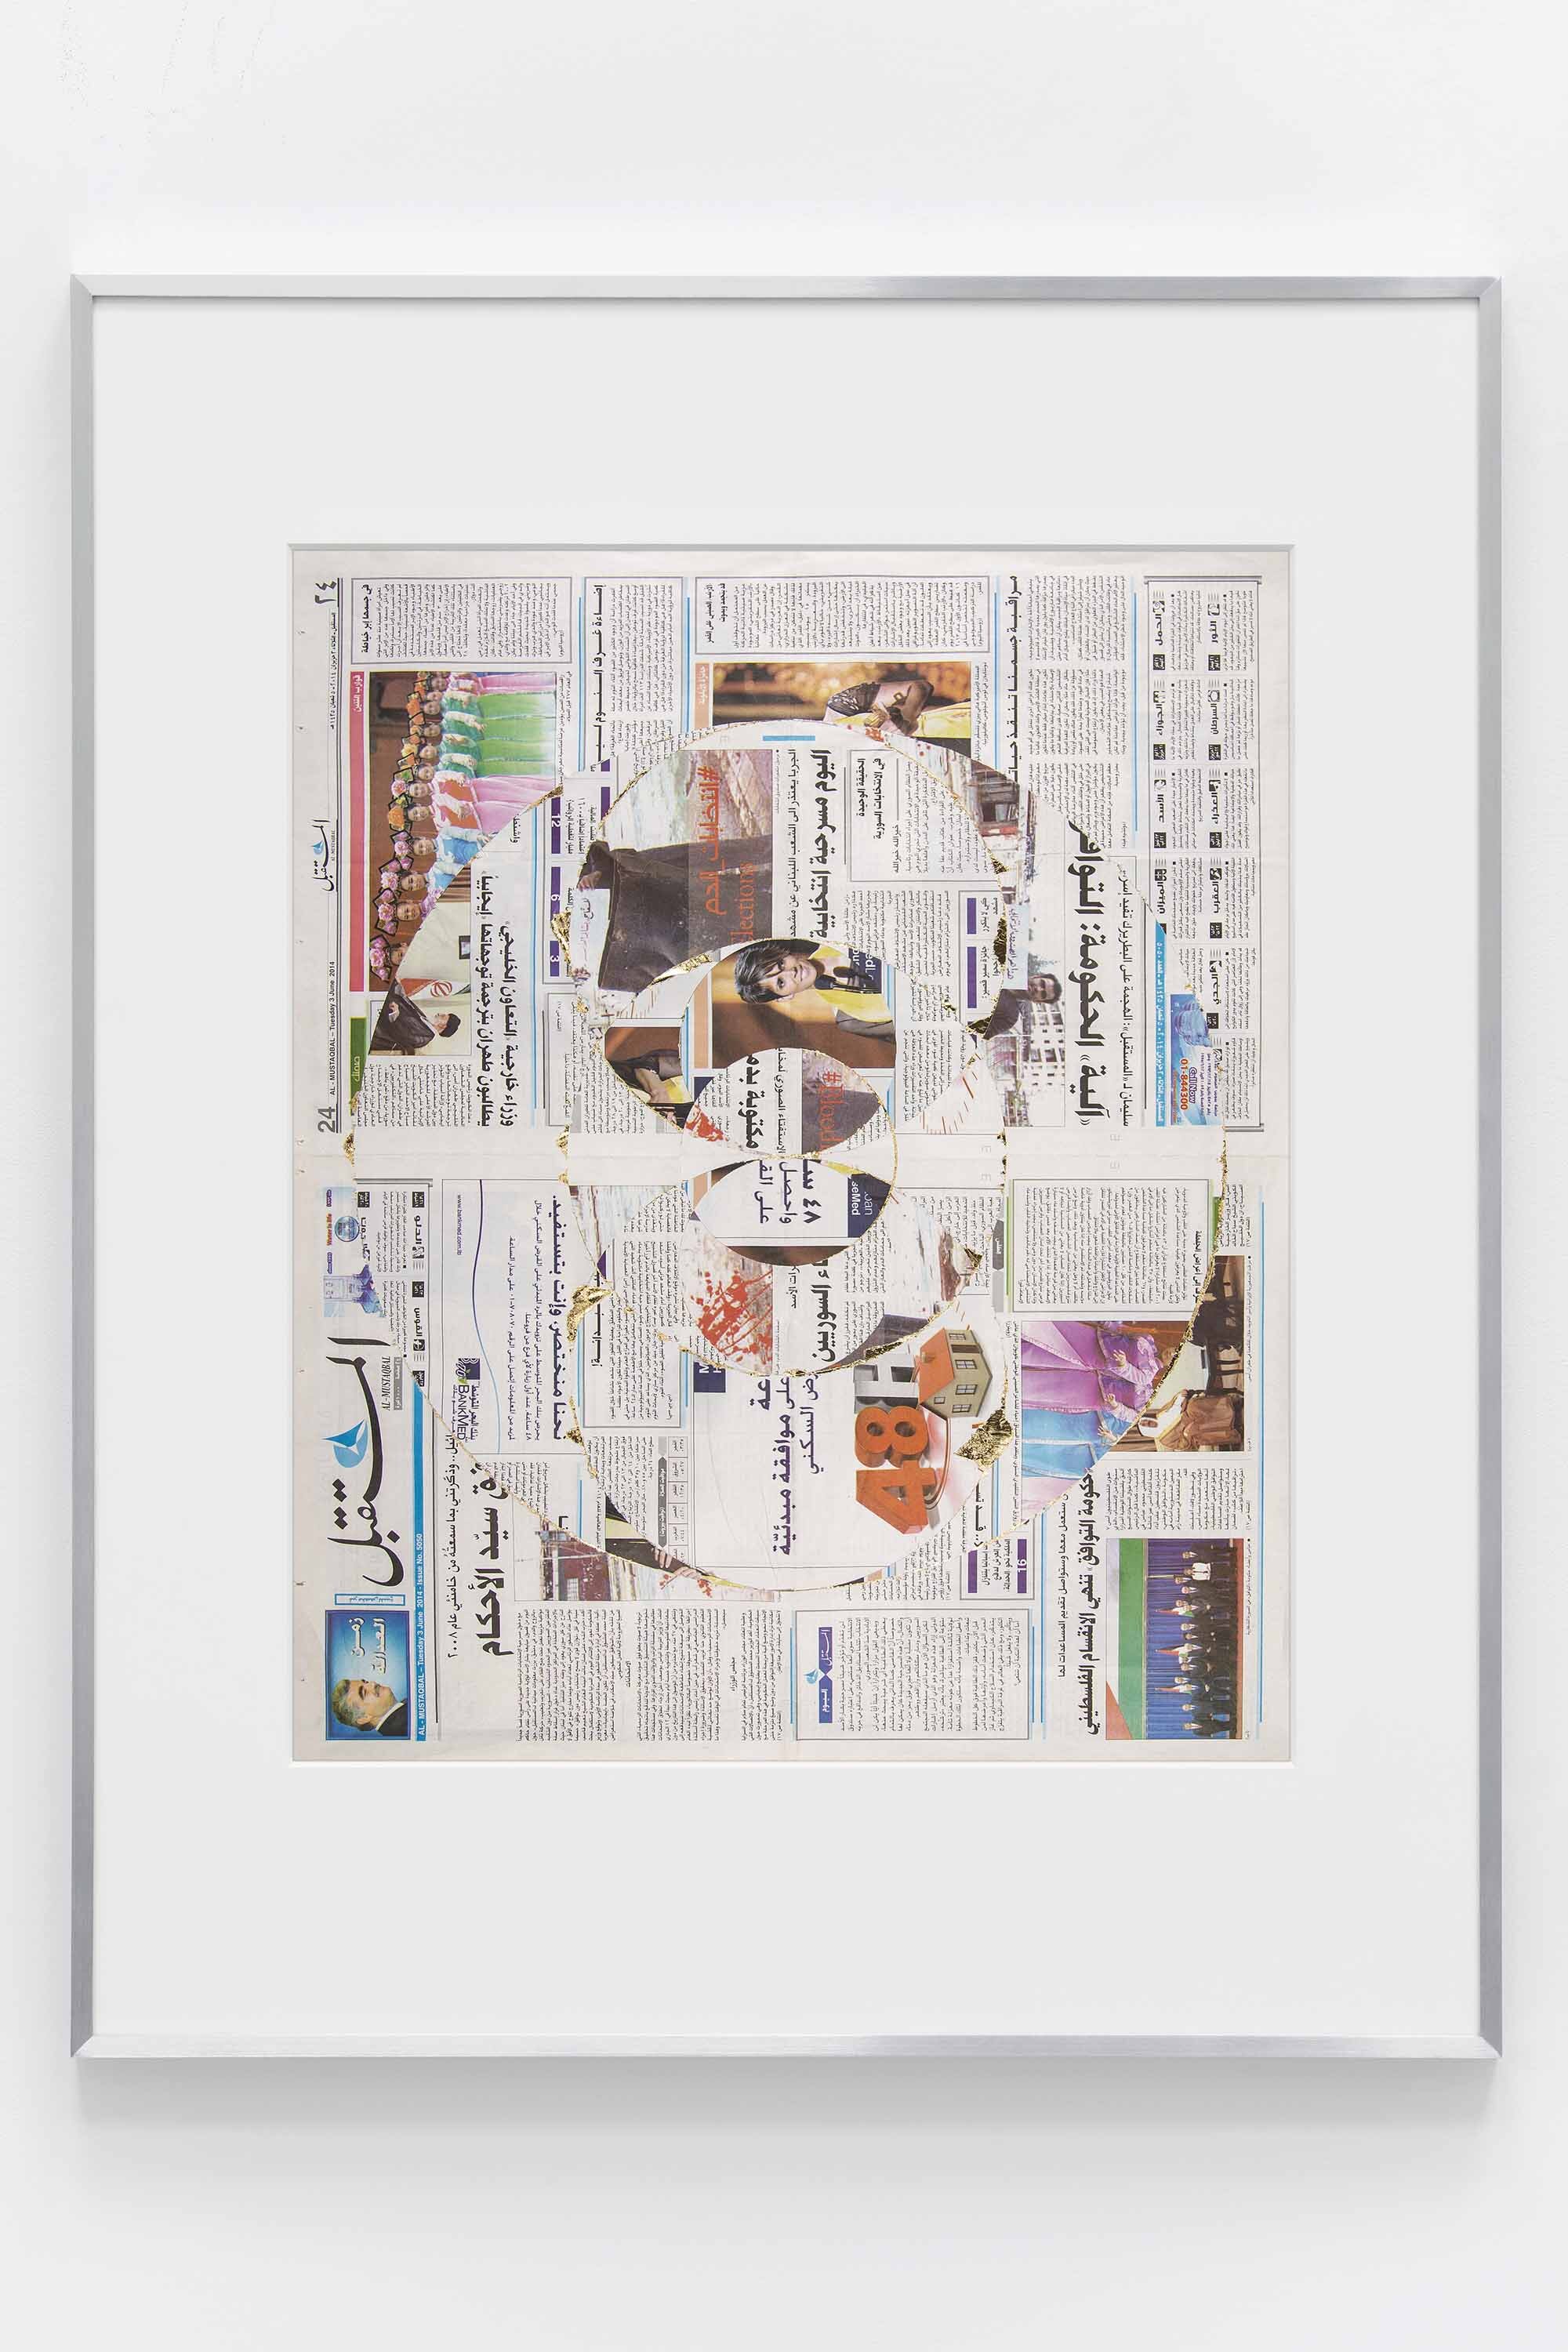   Blind Collage (Seven 180º Rotations, Al-Mustaqbal: Beirut, Lebanon, Tuesday, June 3, 2014)    2021   Newspaper, tape, and 22 karat gold leaf  39 1/8 x 31 1/4 inches   Blind Collages, 2017–  